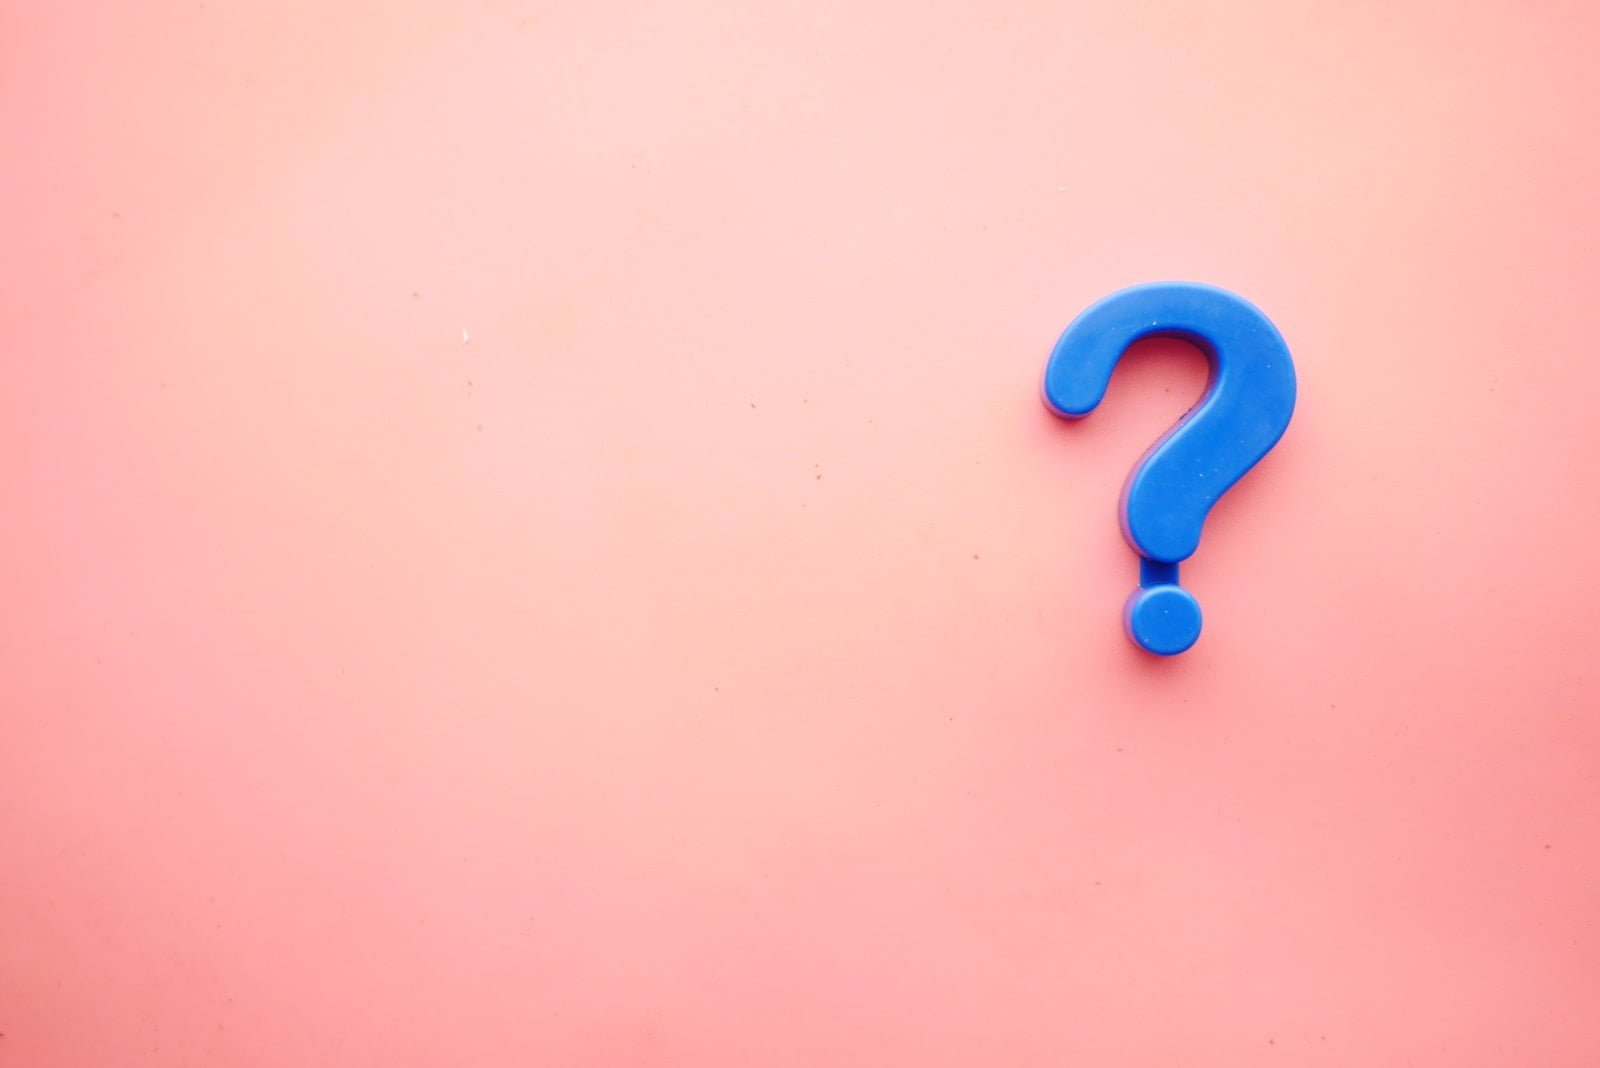 a blue question mark on a pink background - frequently asked questions about kona coffee